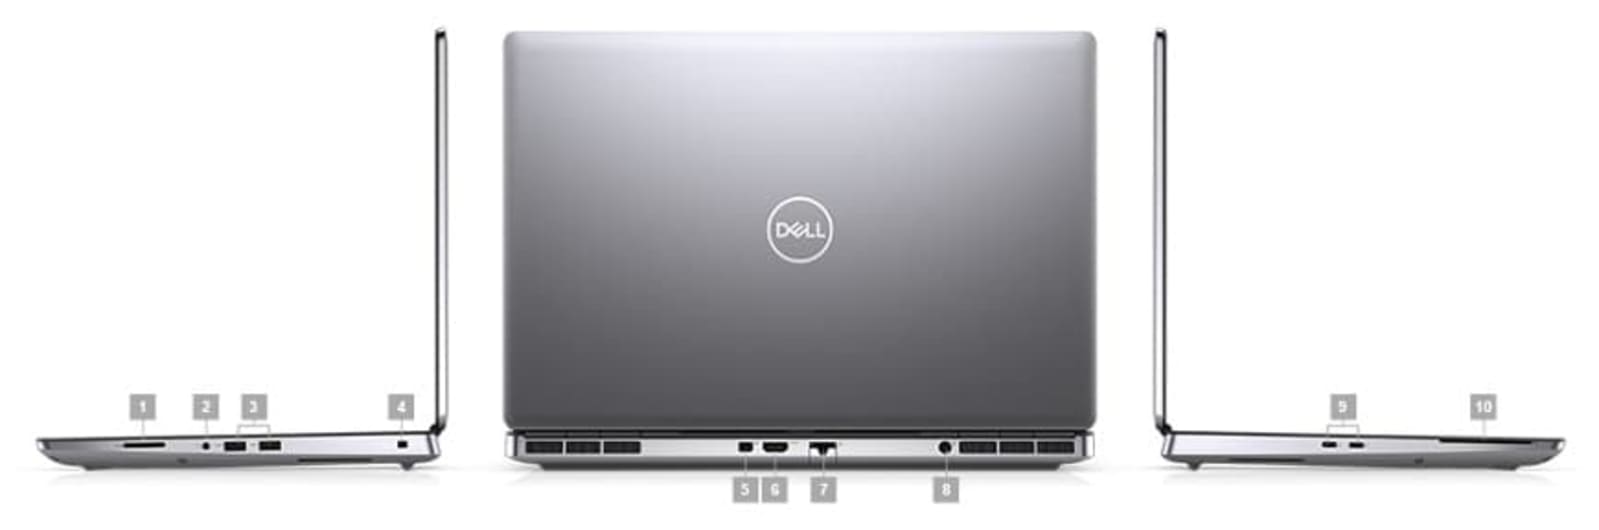 Restored Dell Precision 7000 7560 Workstation Laptop (2021) | 15.6" FHD | Core i5 - 512GB SSD - 64GB RAM - Nvidia T1200 | 6 Cores @ 4.6 GHz - 11th Gen CPU (Refurbished) - image 3 of 11